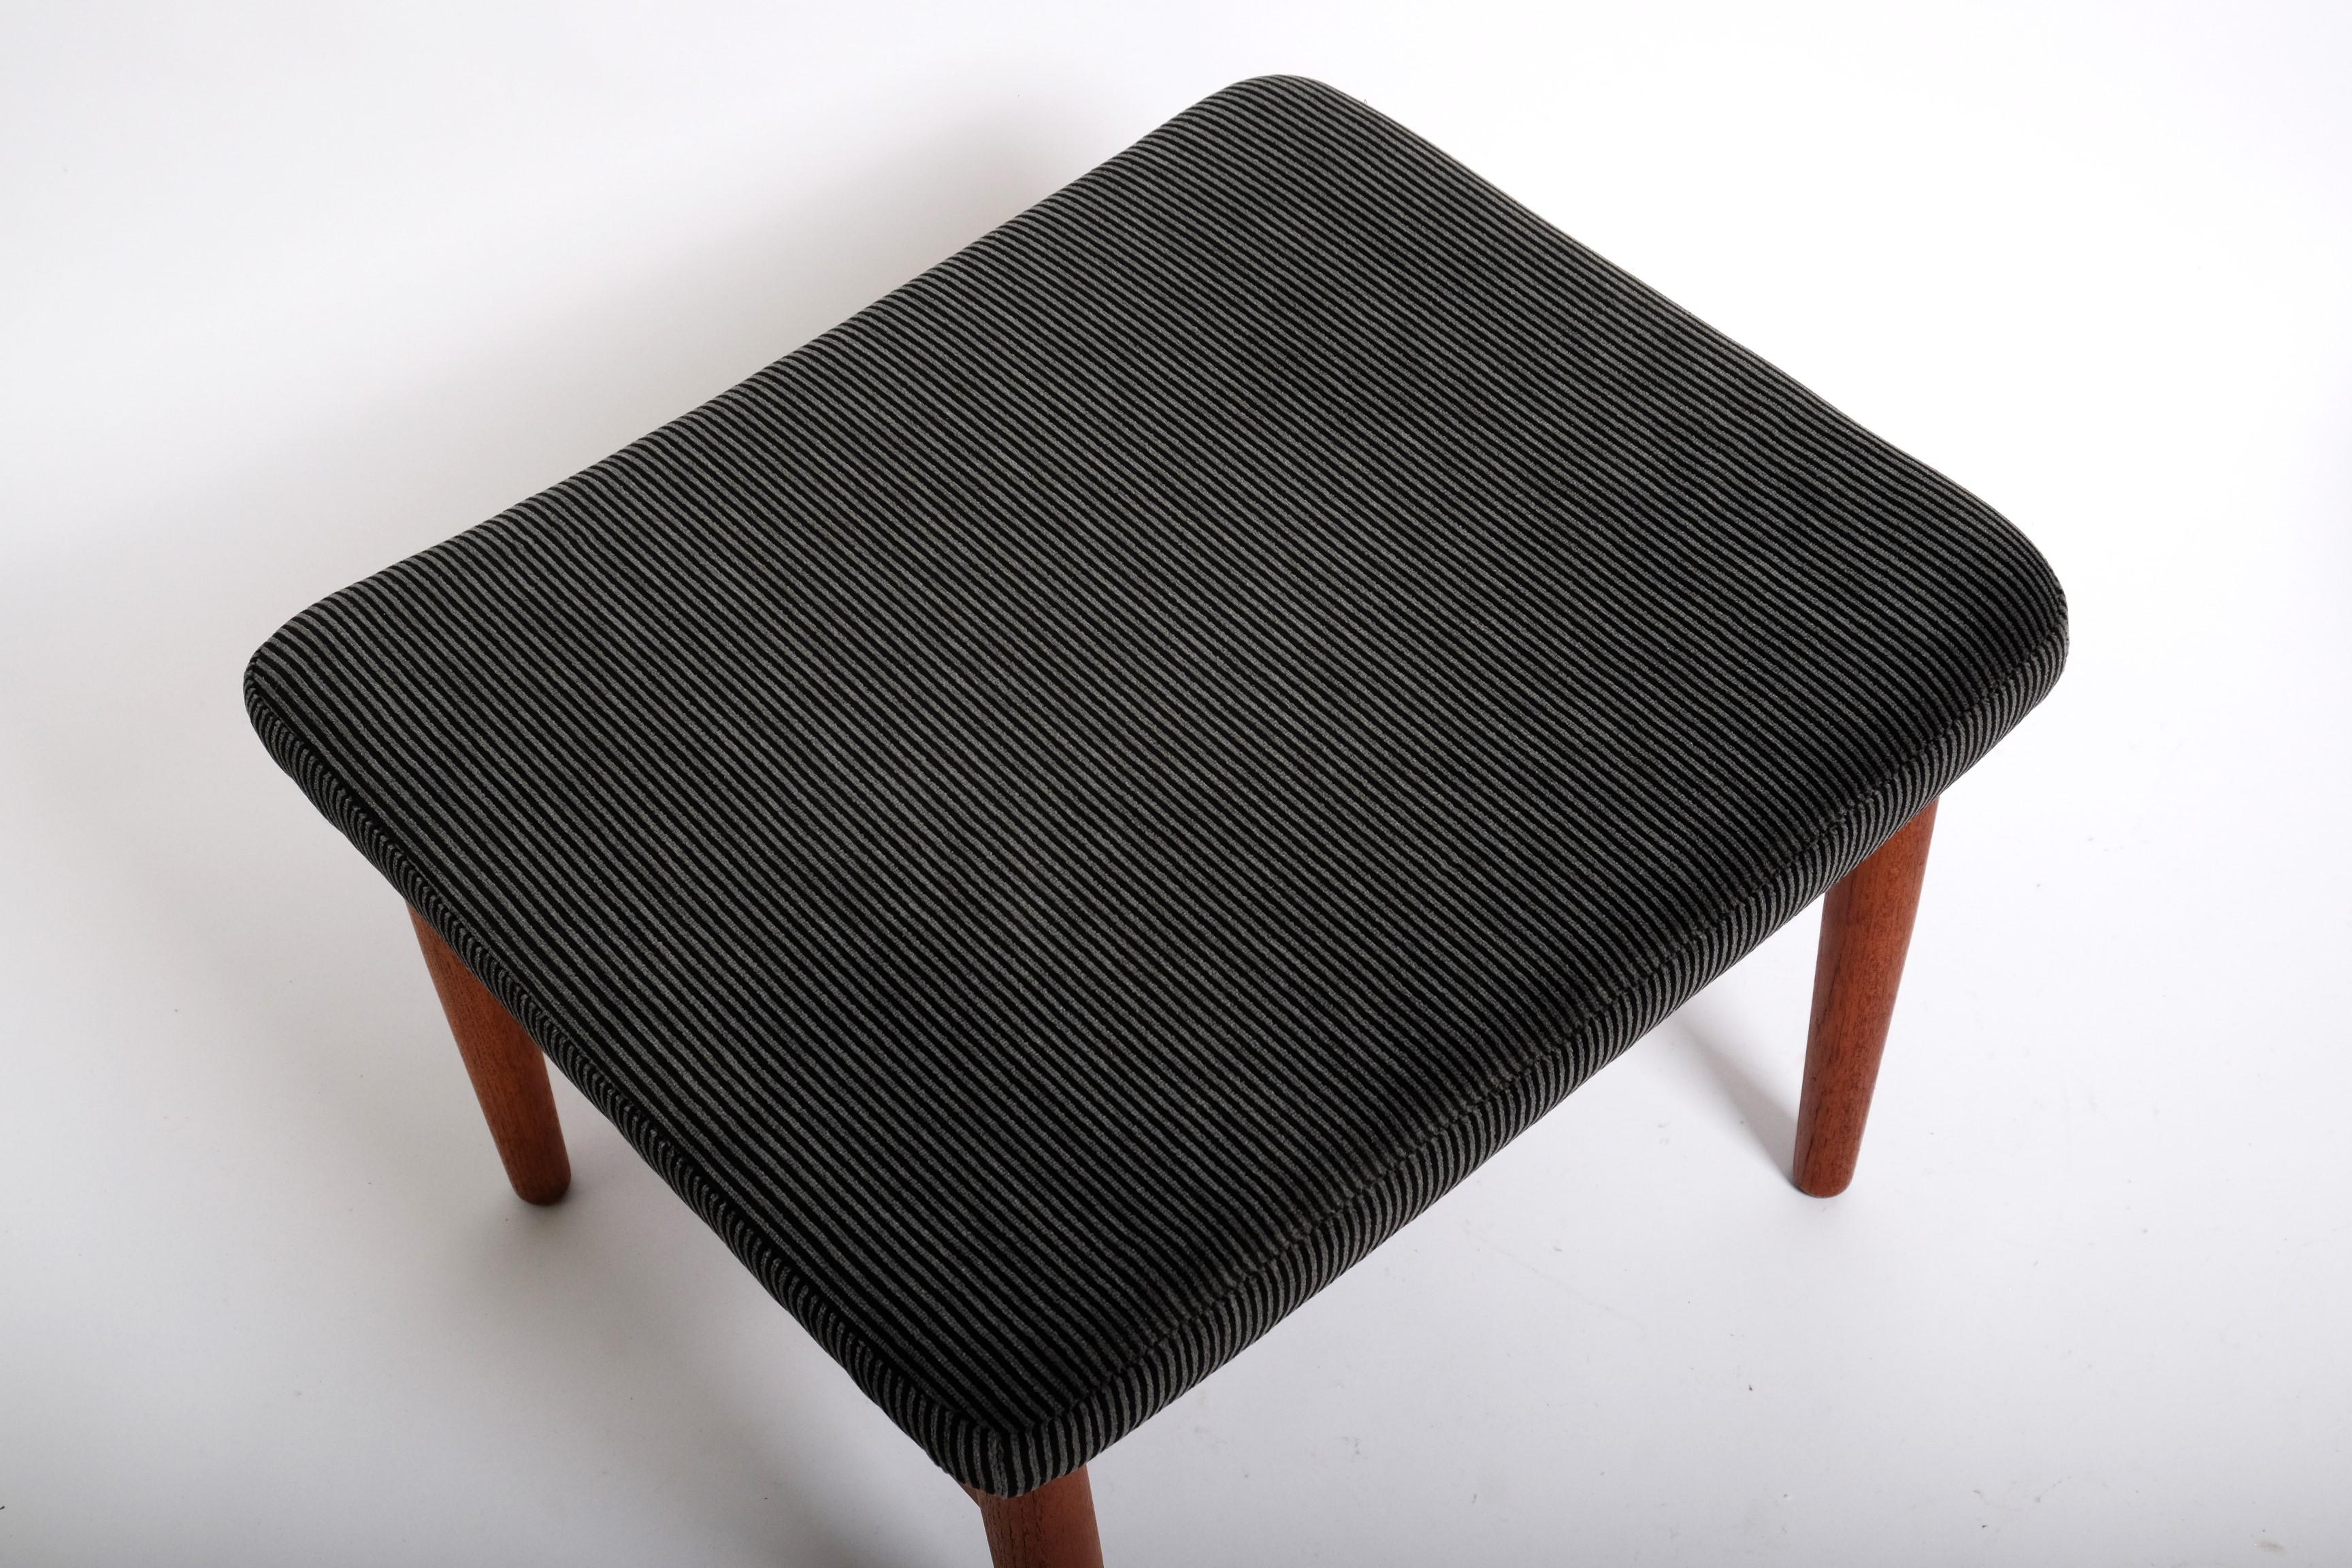 Two Mid-Century Stools by Arne Vodder FD164 Ottomans France & Son, Denmark 1960s For Sale 10